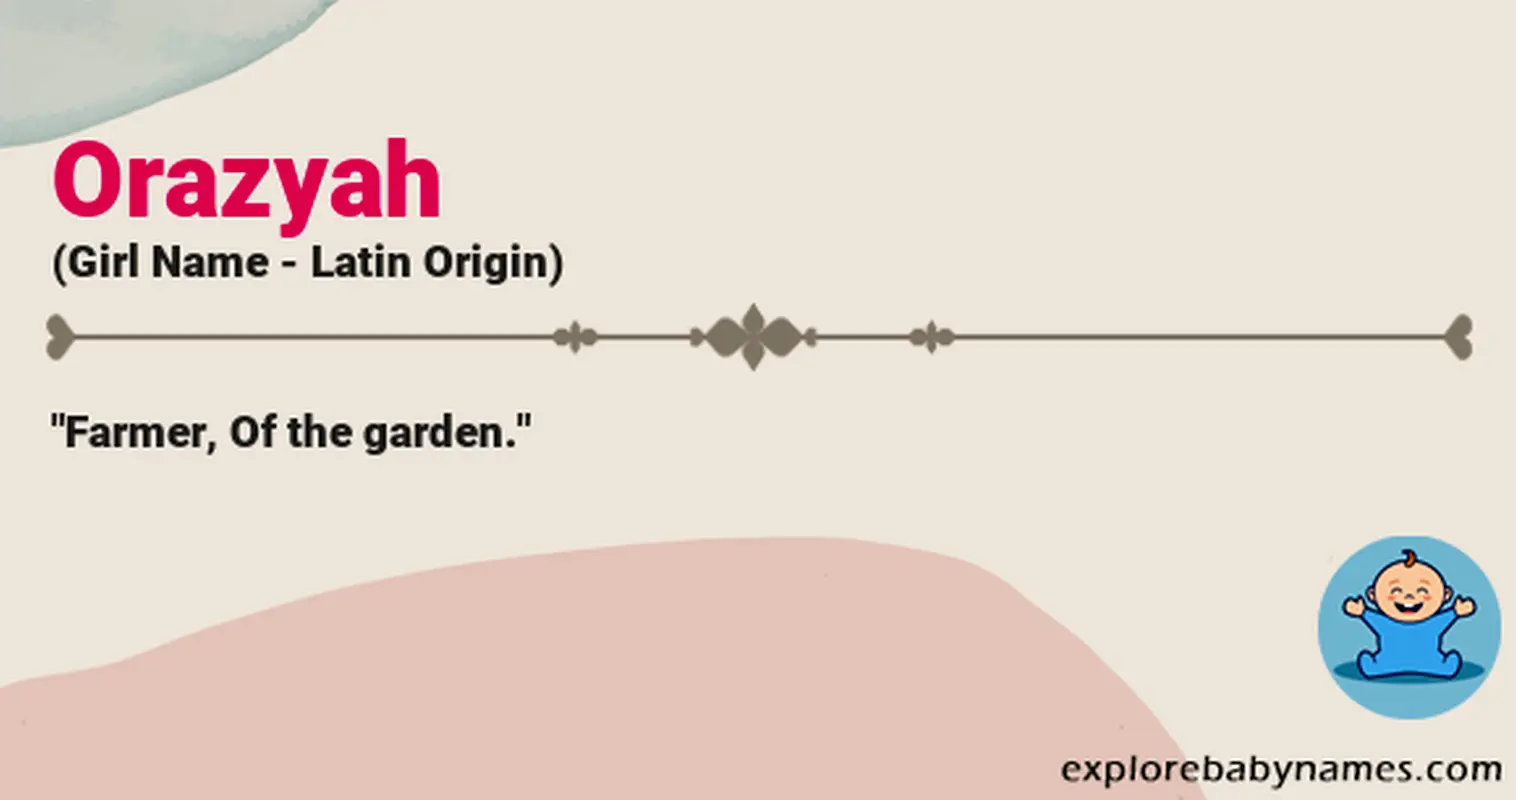 Meaning of Orazyah